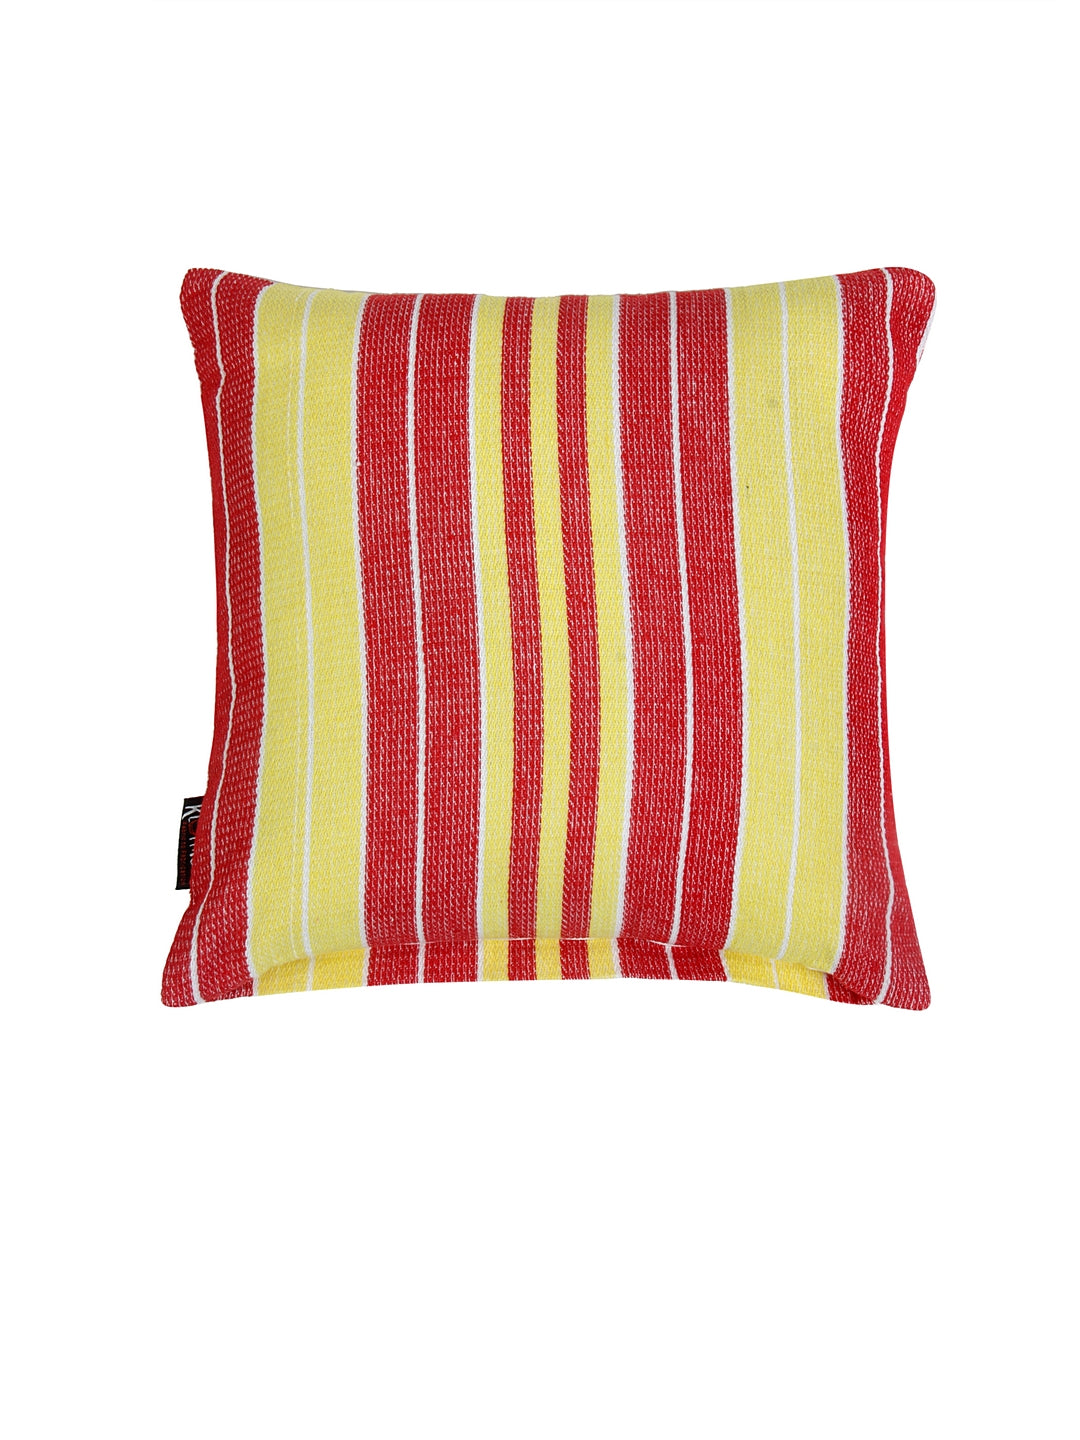 KLOTTHE Set of Five Red Poly Cotton Cushion Covers With Microfibre Fillers (35X35 cm)